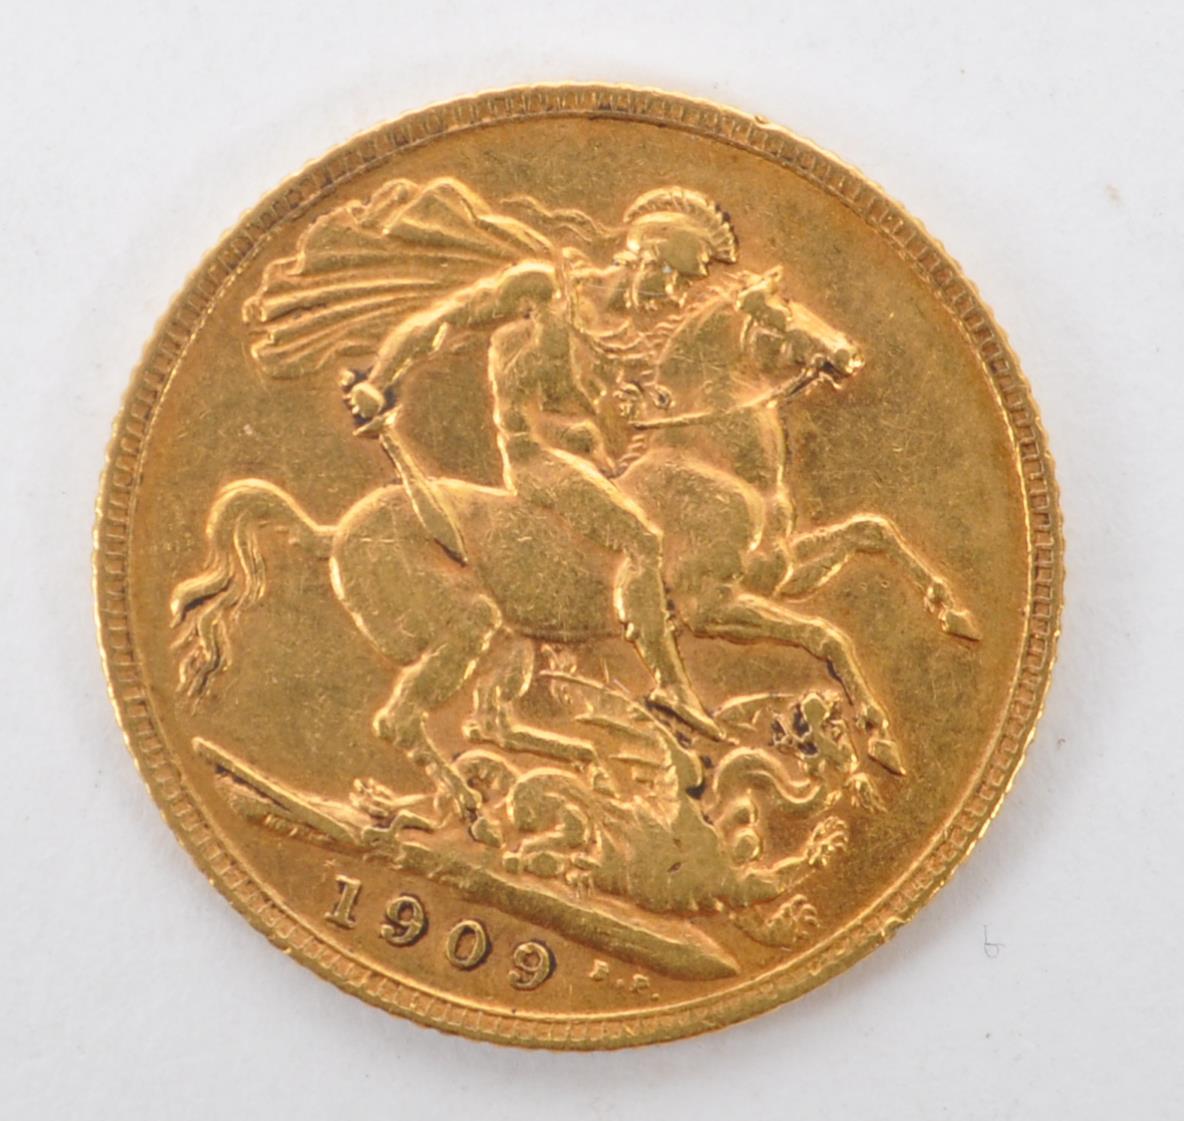 1909 EDWARD VII GOLD FULL SOVEREIGN COIN - Image 2 of 2